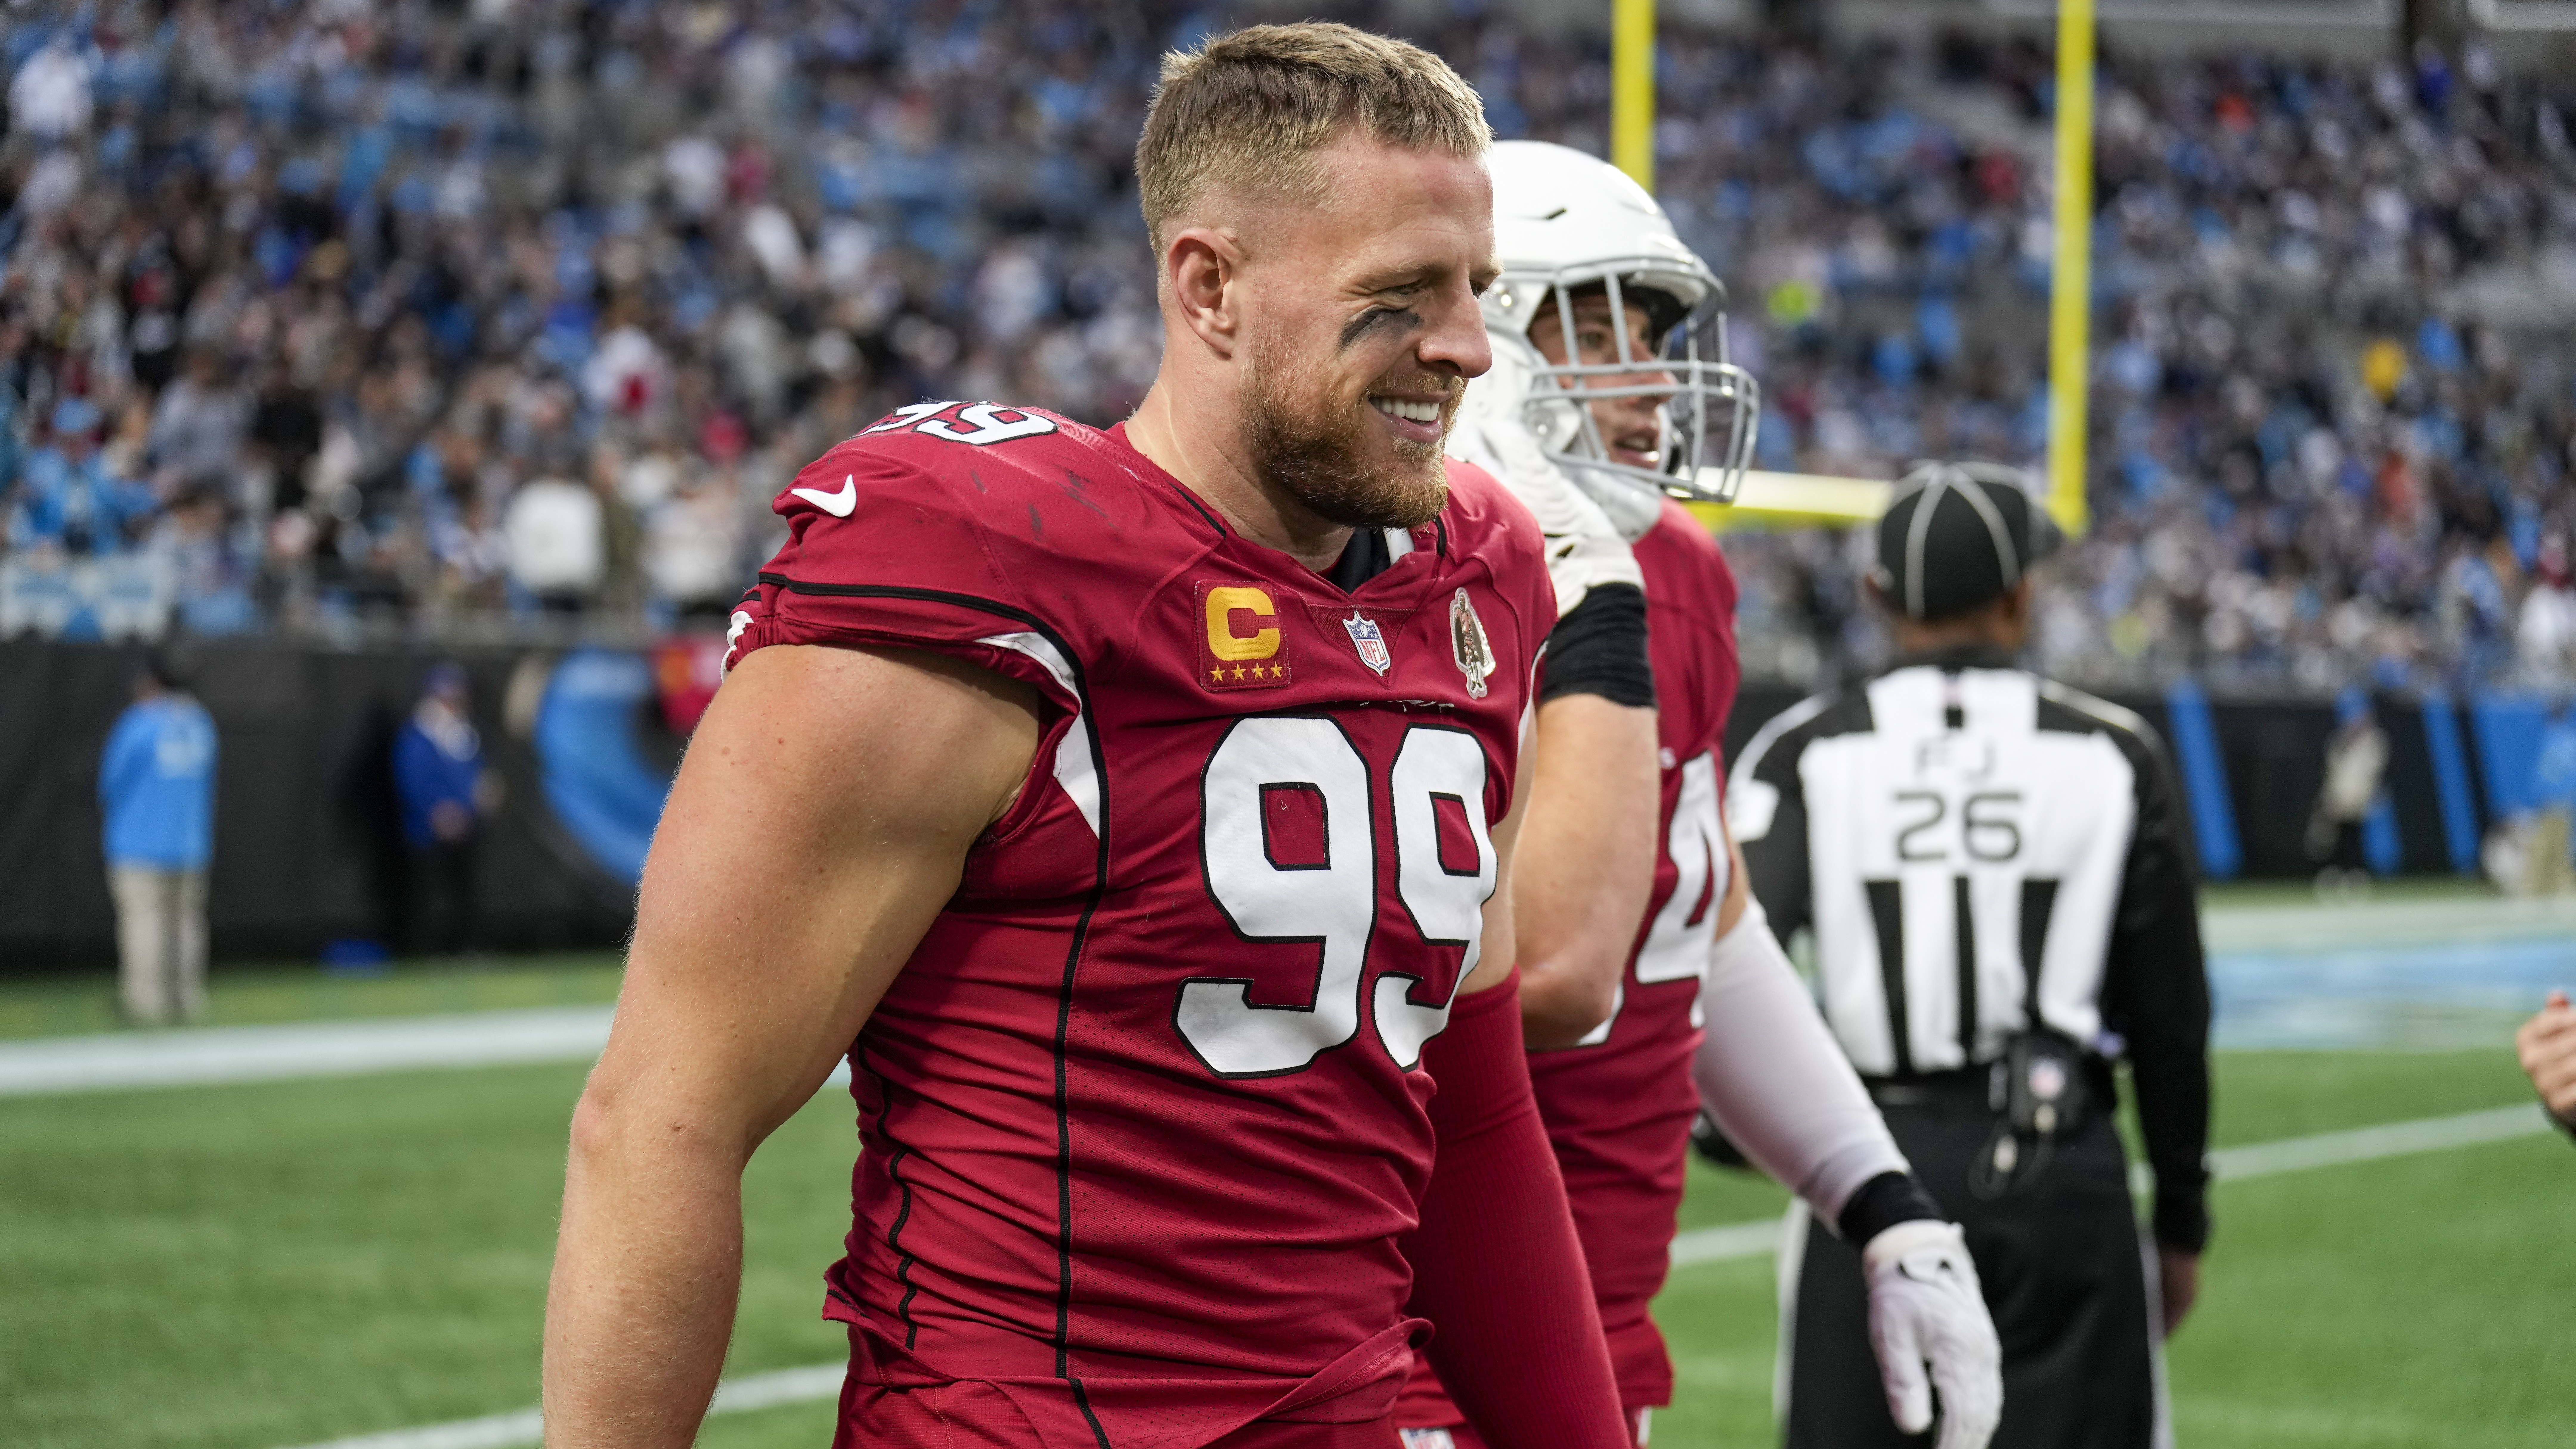 Watt’s A-Fib Announcement a Surprise, but He’ll Do What’s Best for His Health